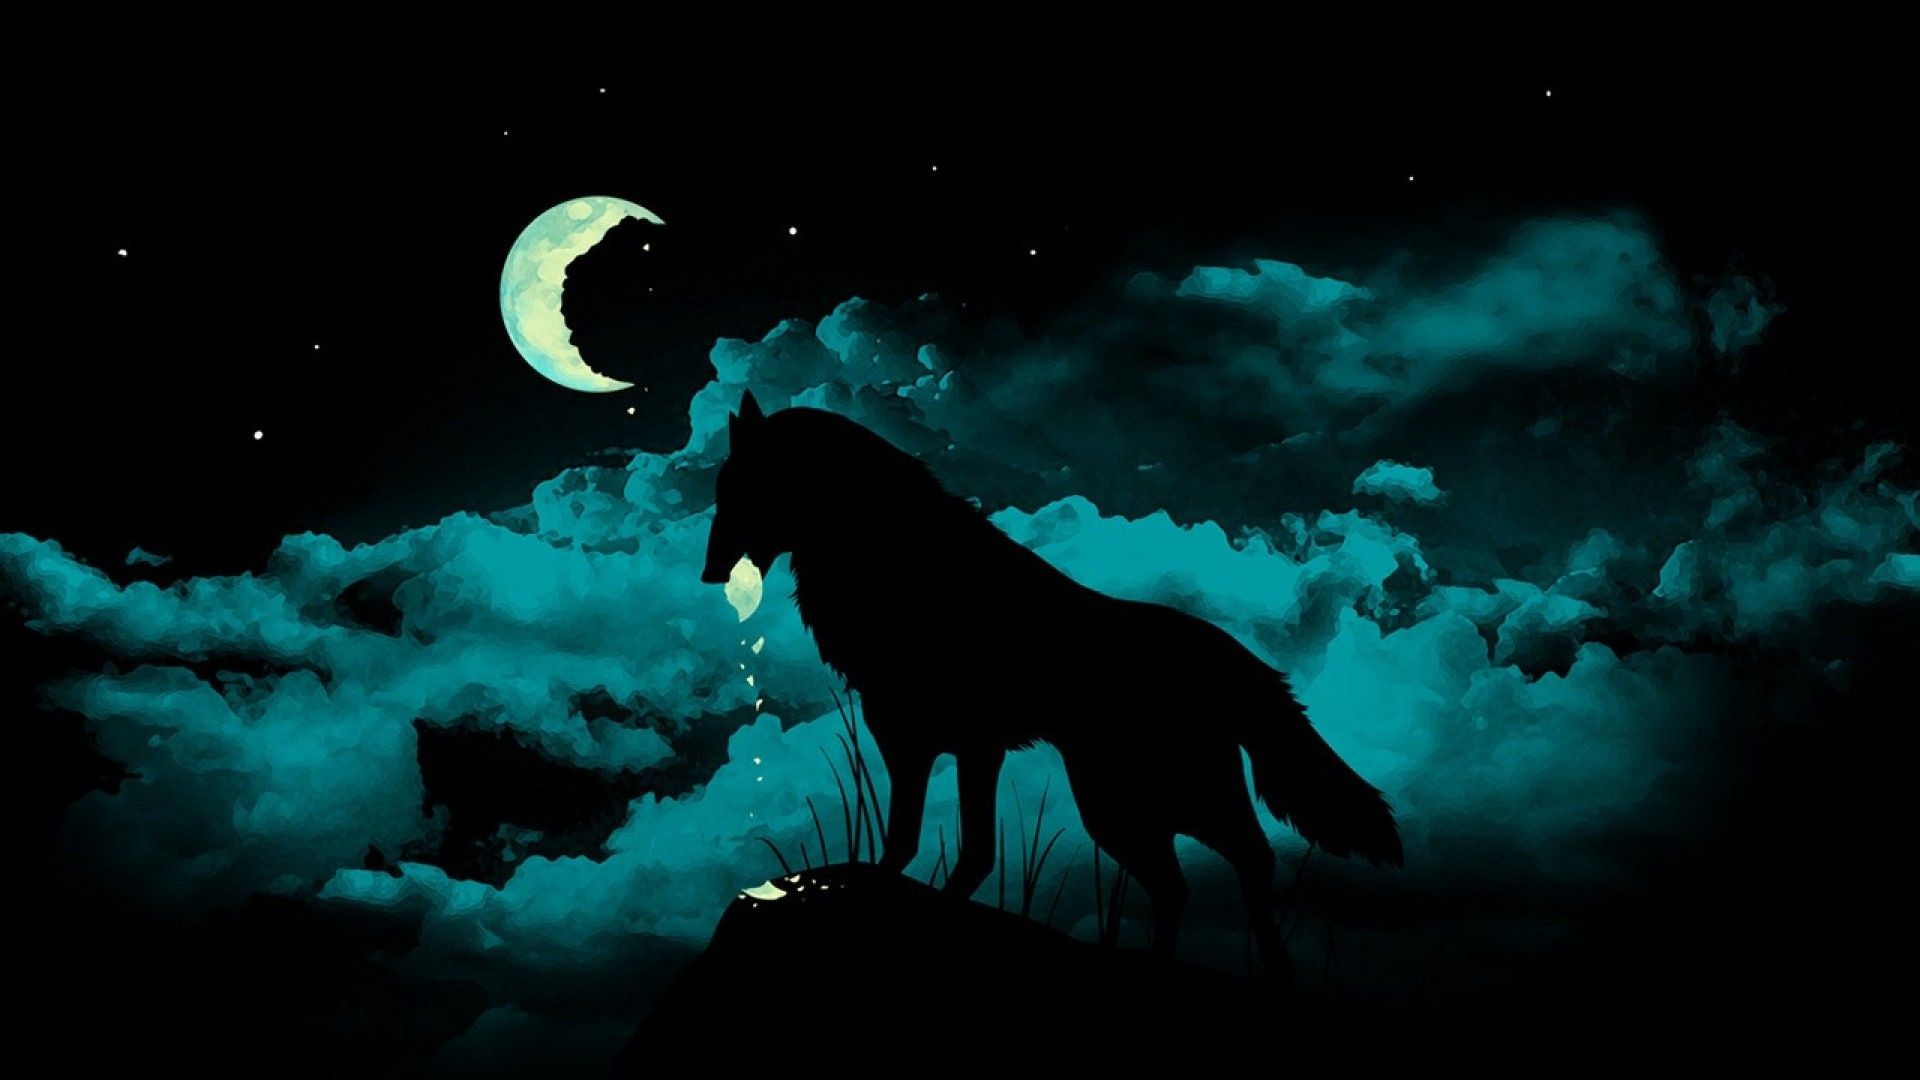 wolf howling at the red moon wallpaper 62 pictures wolf howling at the red moon wallpaper